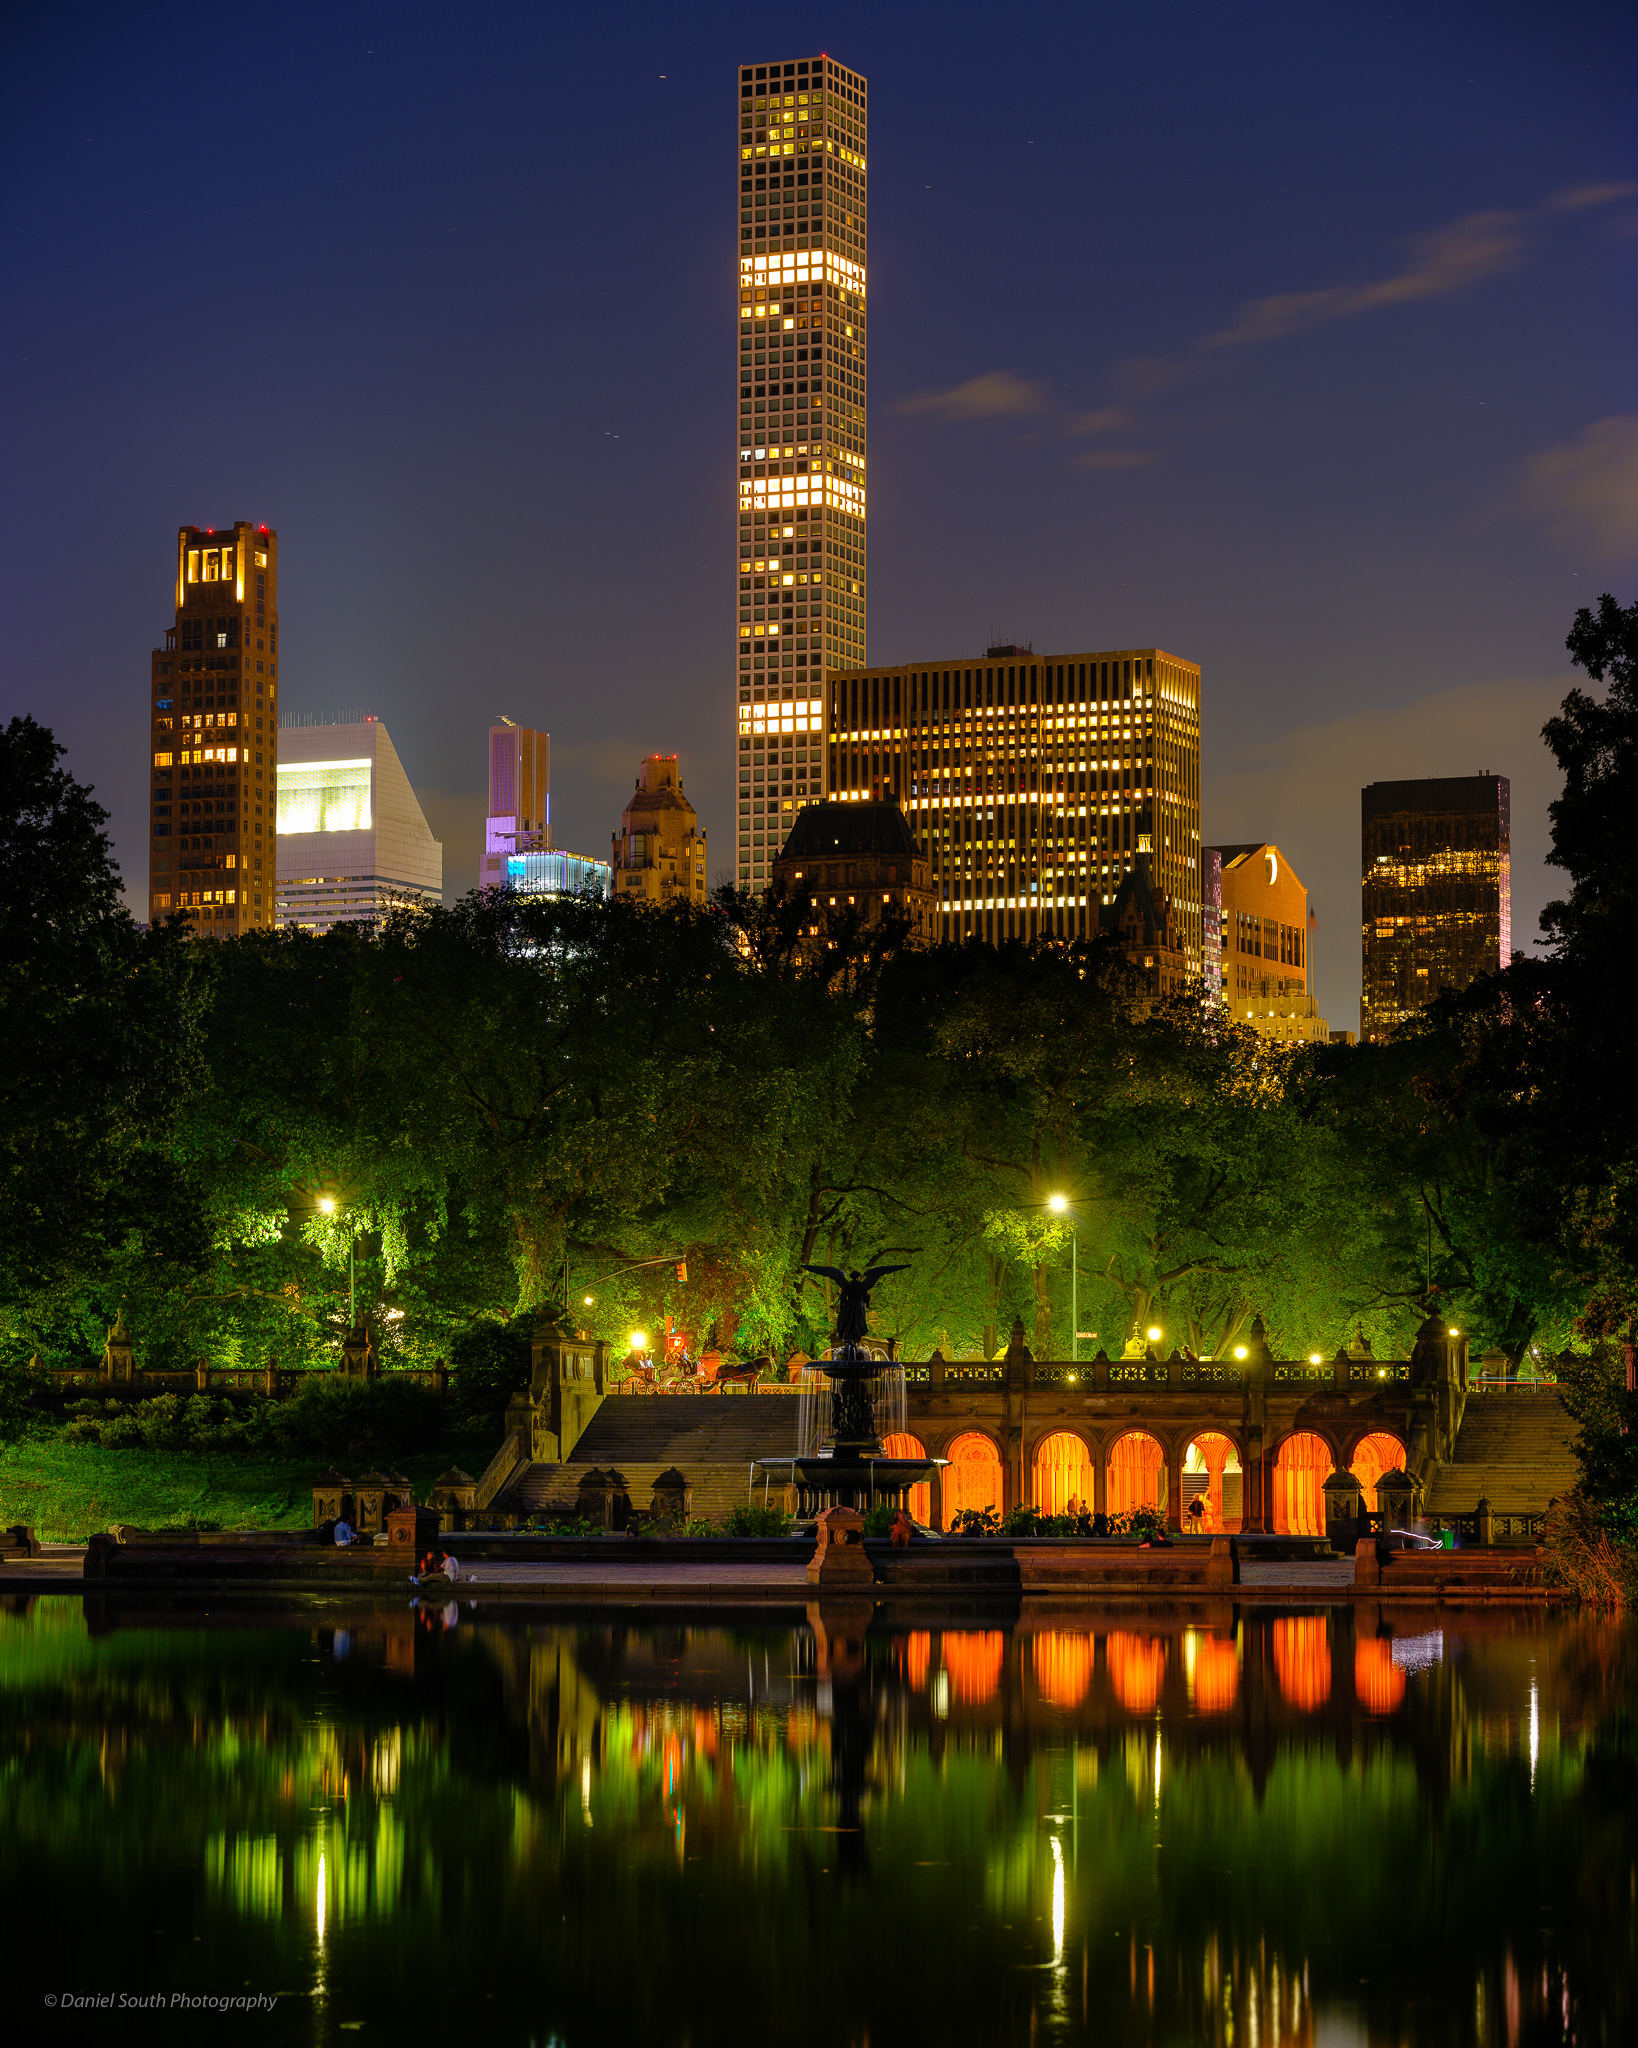 a photo of bethesda terrace central park at night in new york city